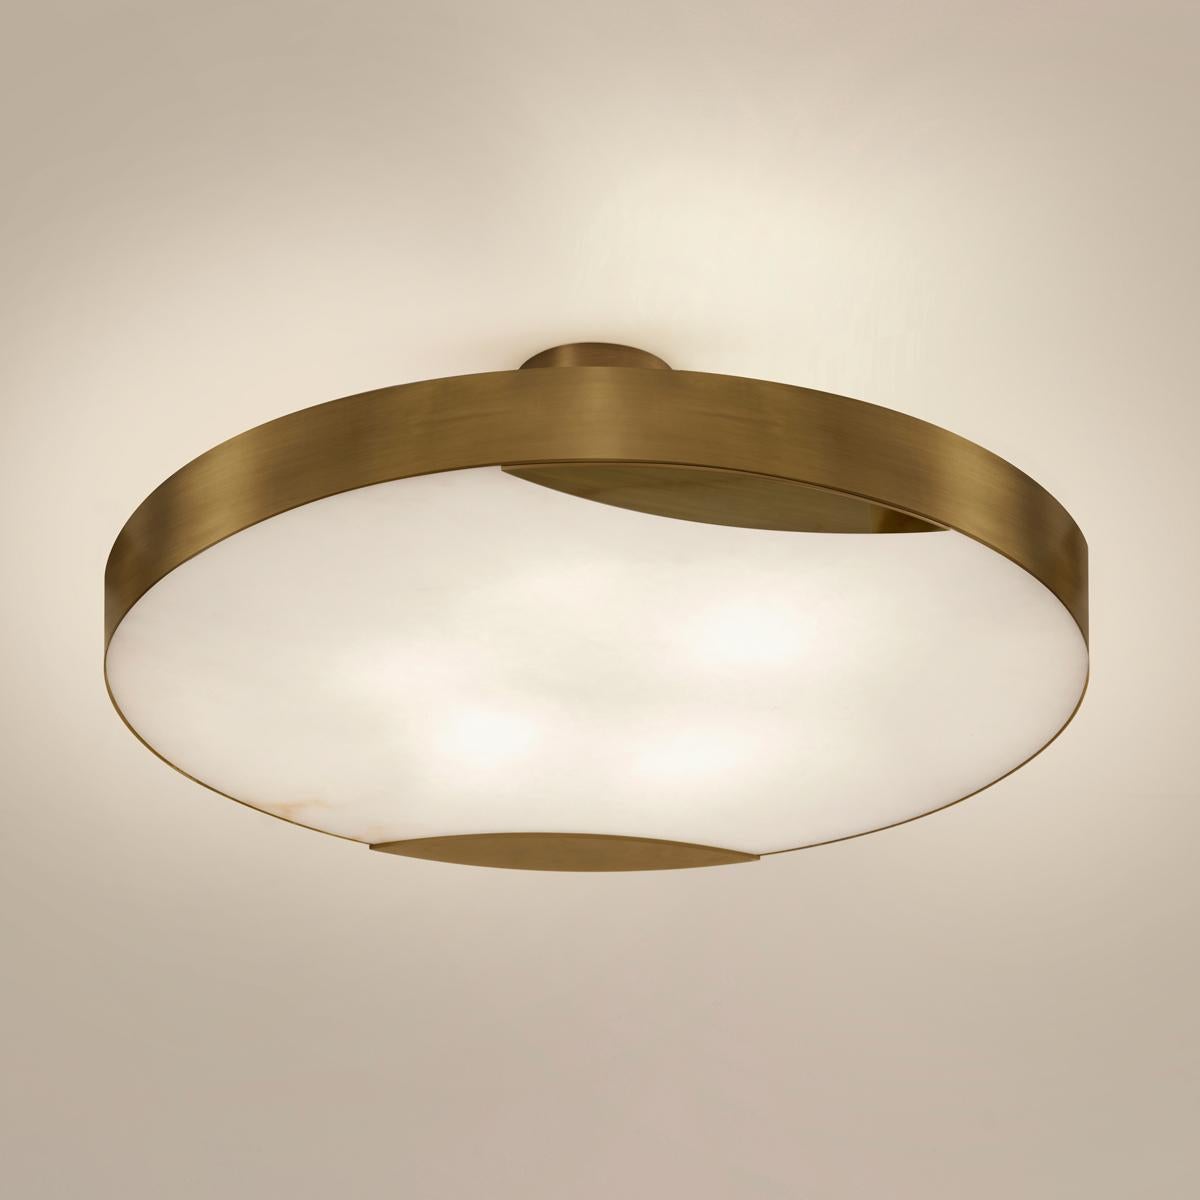 Cloud N.1 Ceiling Light by Gaspare Asaro-Polished Brass Finish In New Condition For Sale In New York, NY